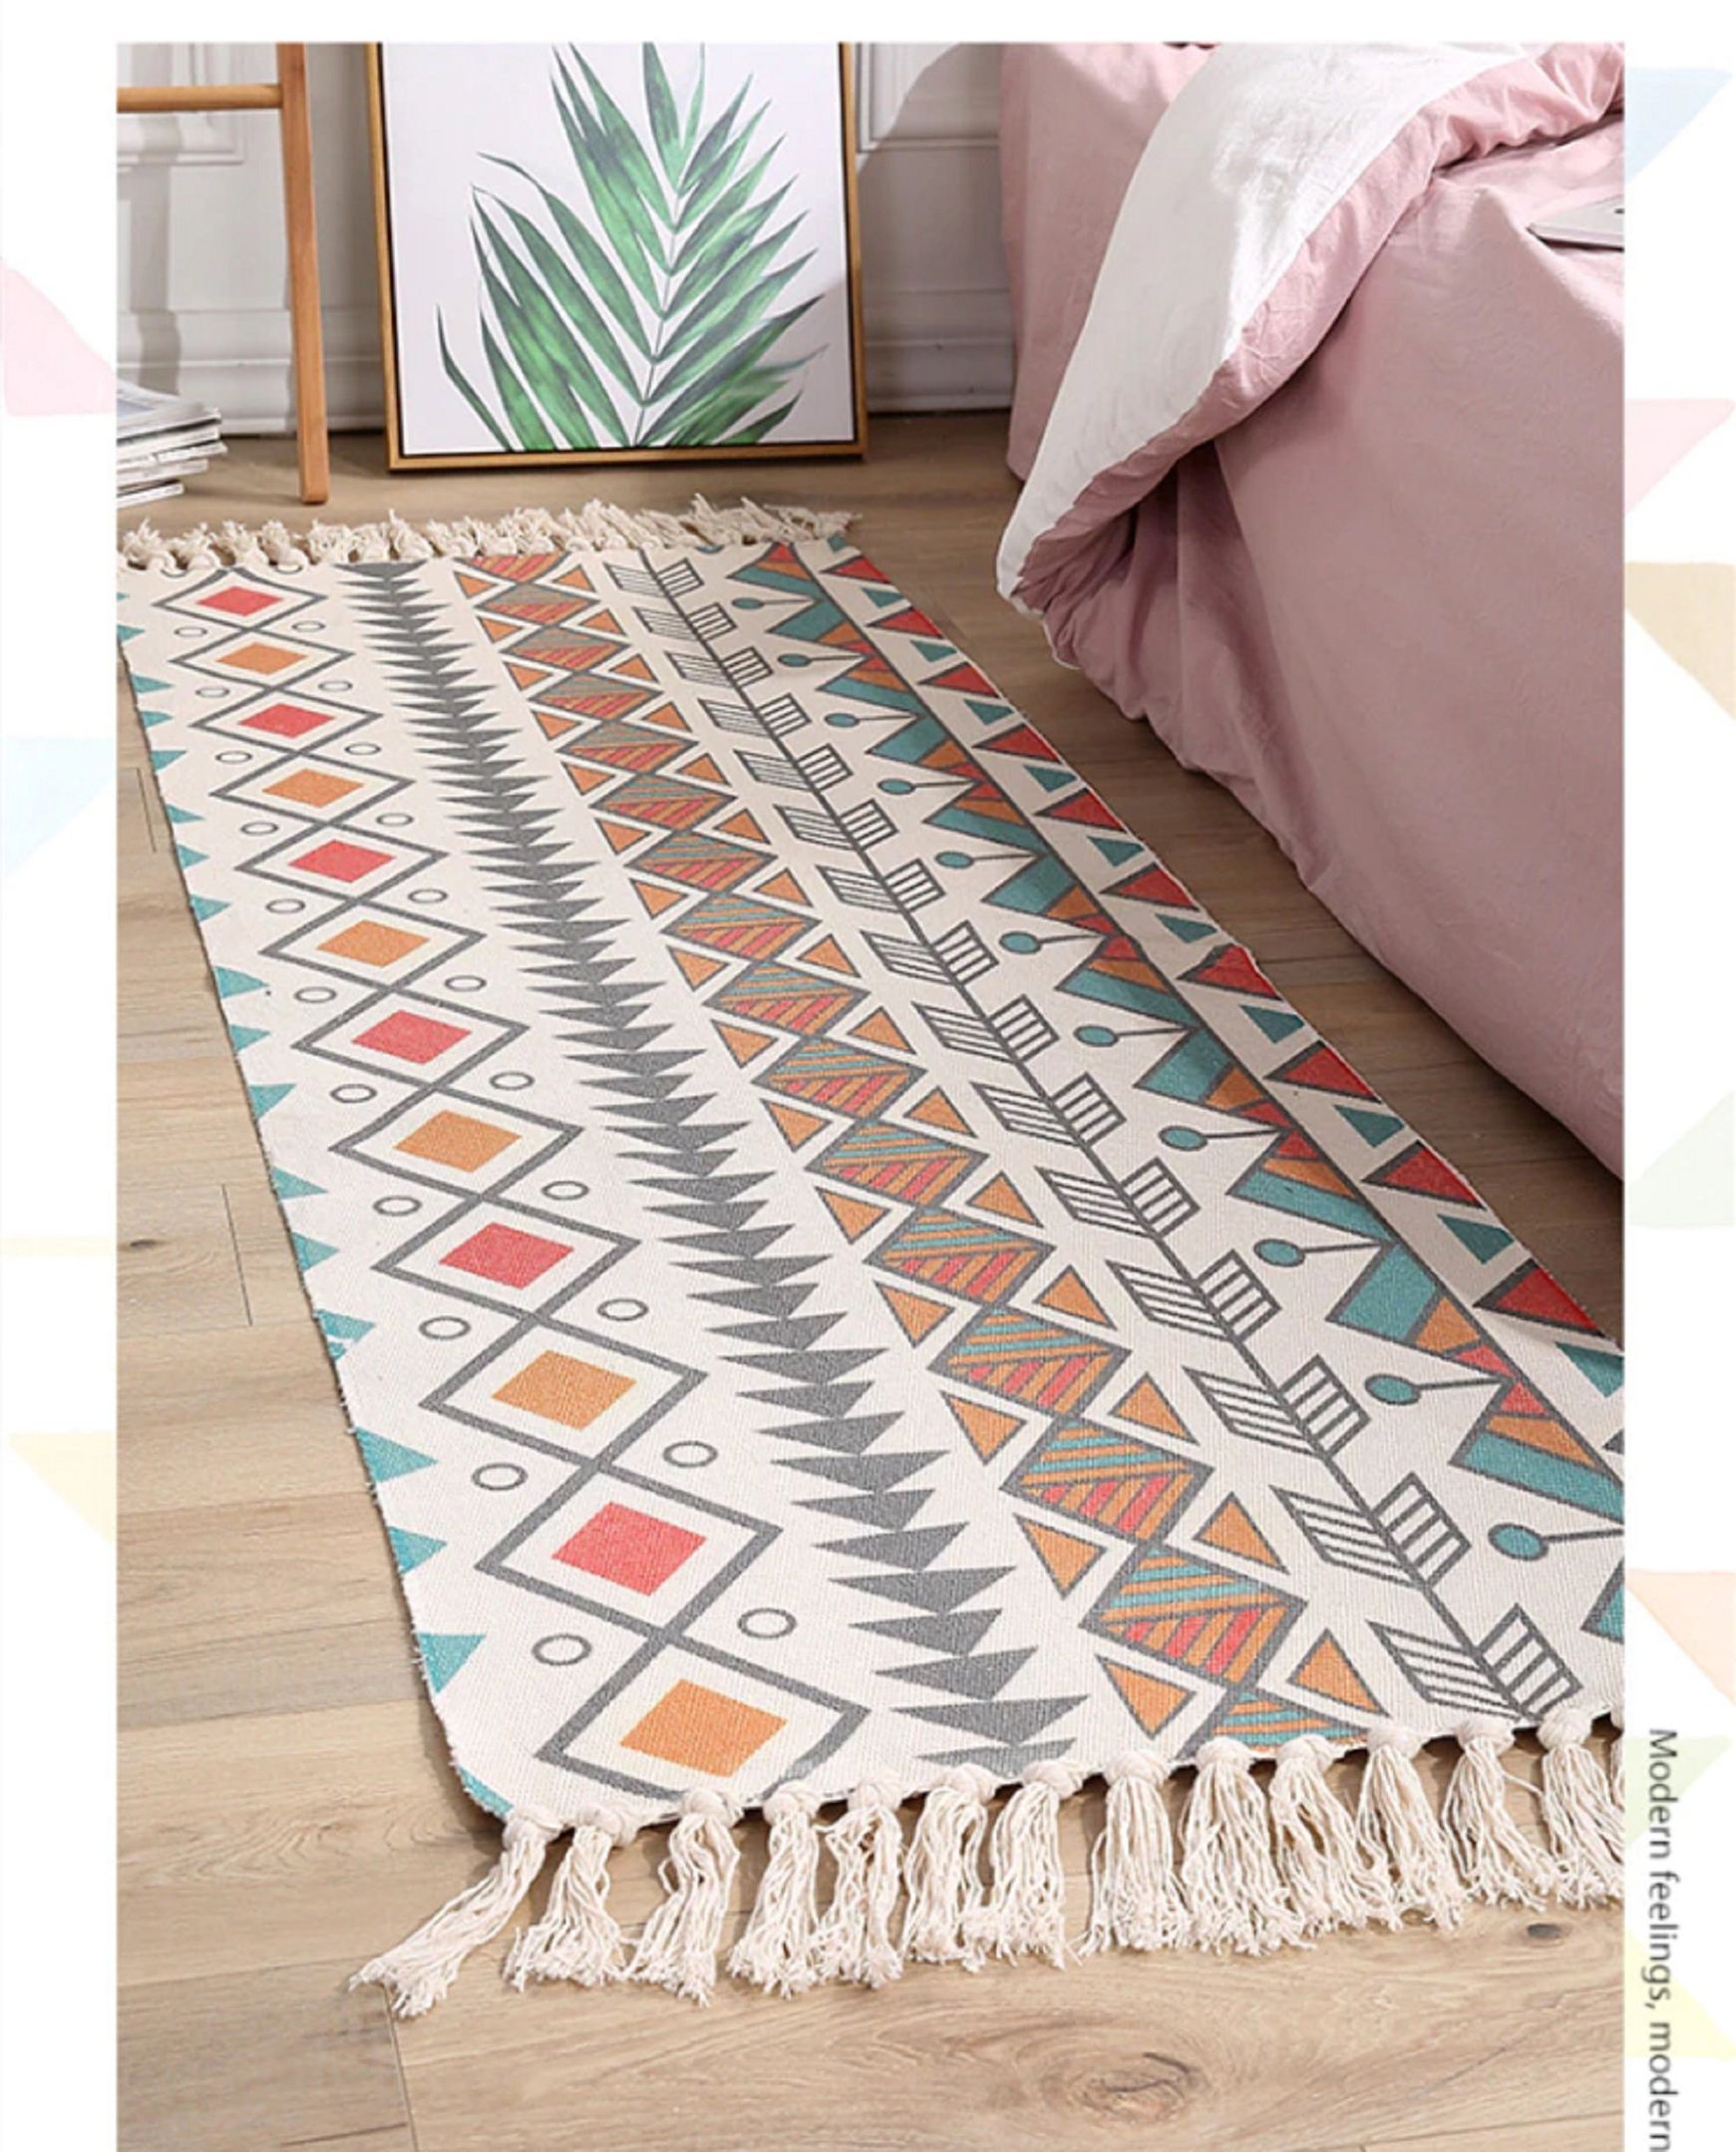 23.62x59.06in+7.87 in Tassel Table Linens SMASAMDE Cotton Carpet with Fringed Handmade Flatweave Bohemian Simple Fringed Living Room Bedroom Bedside Mats 